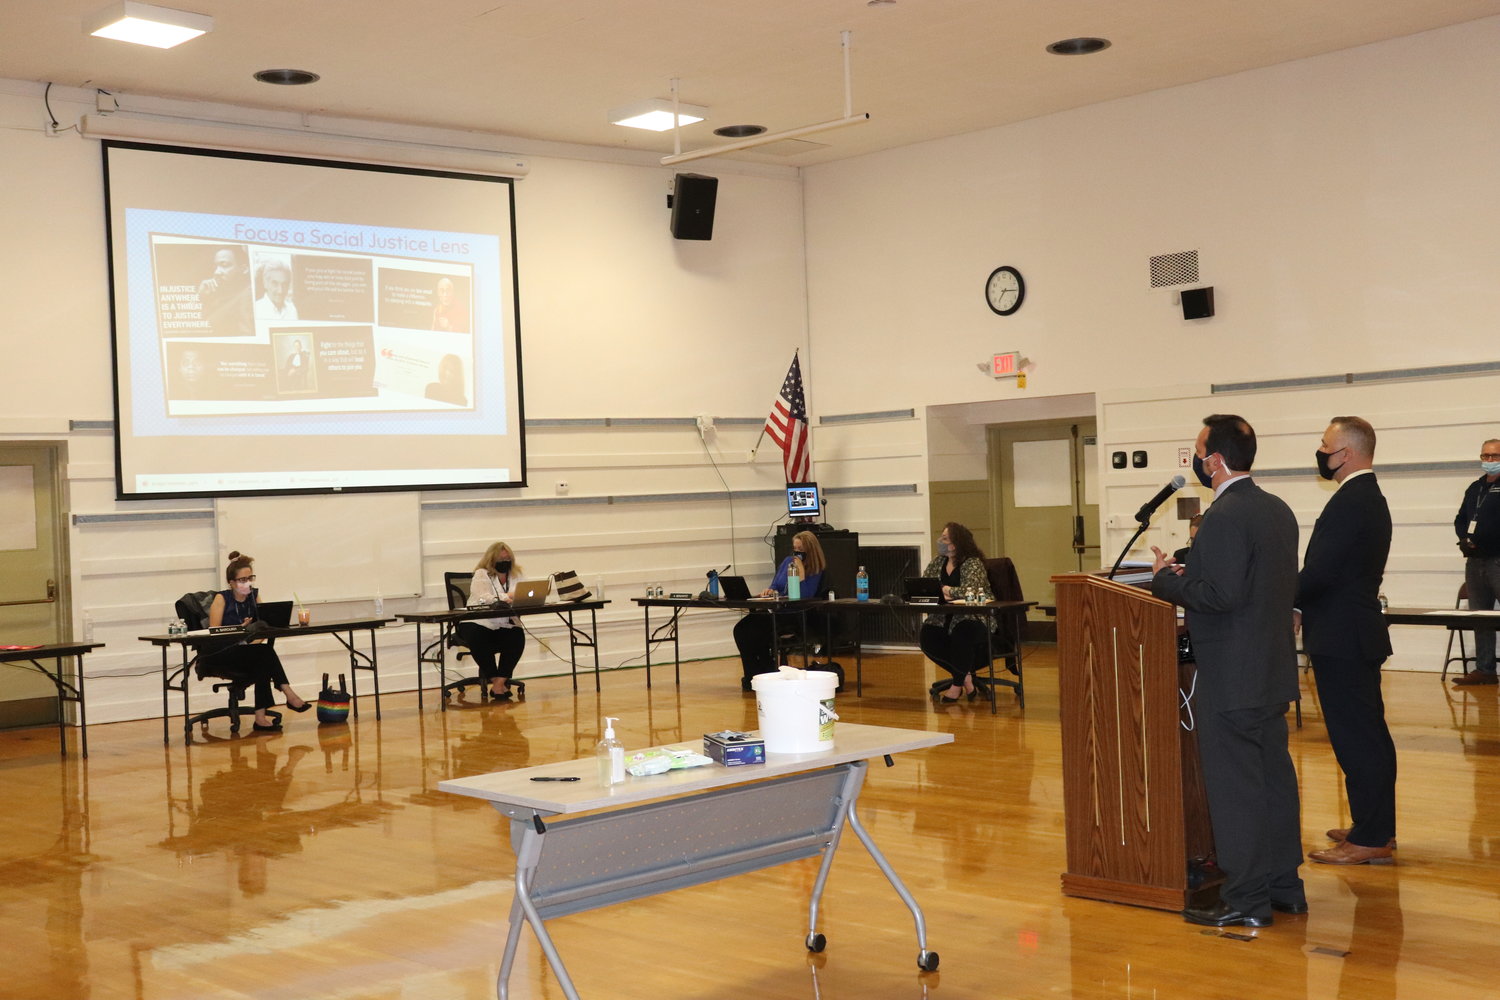 Jim Mendonis, director of social studies and 21st century learning, left, and Frank Lukasik, director of literacy and funded programs, discussed the importance of time, access and choice of books with diverse characters and storylines with the East Meadow Board of Education.